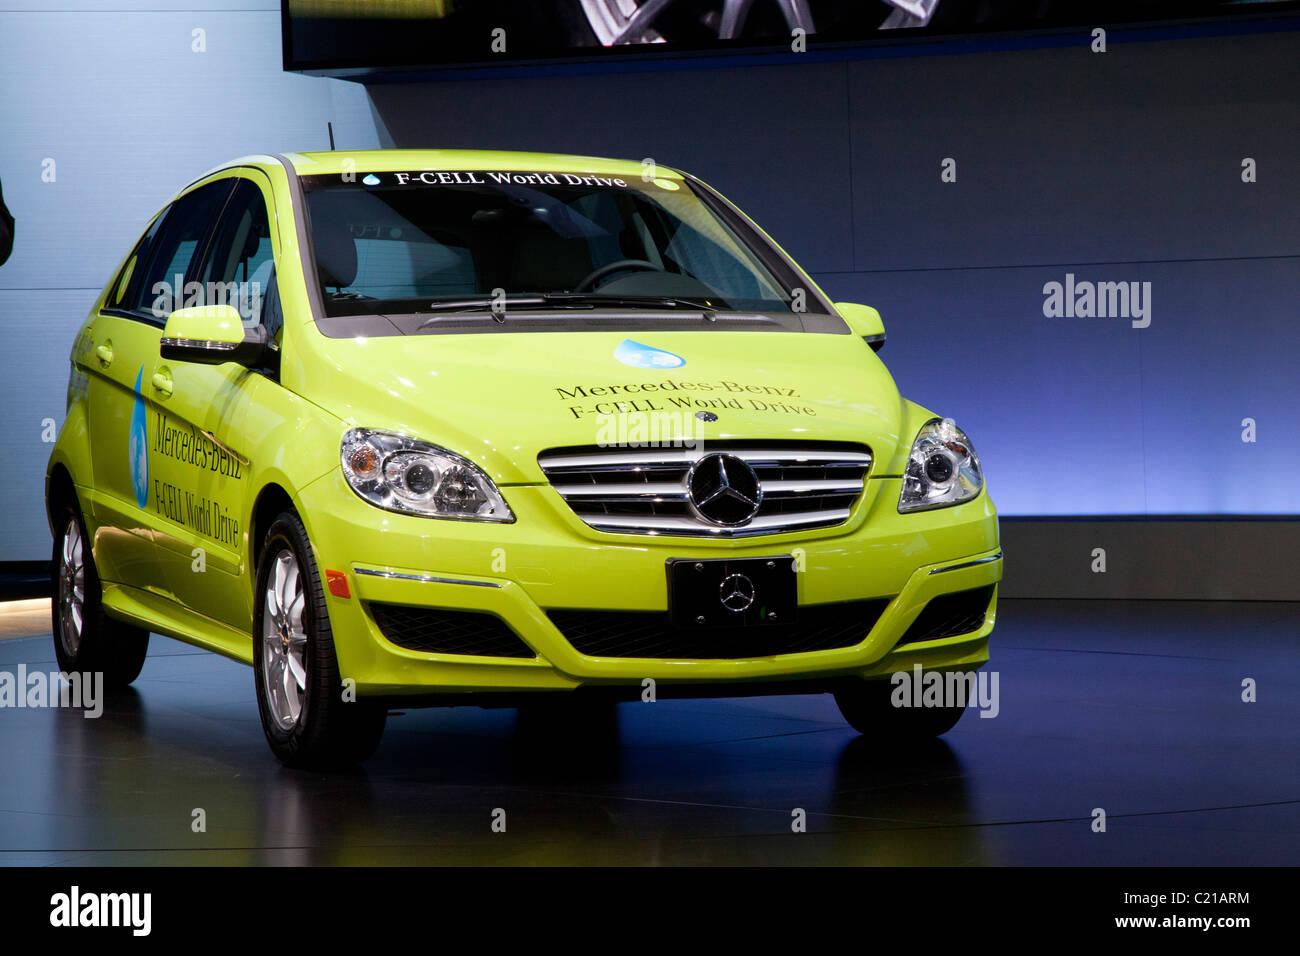 Detroit, Michigan - The Mercedes-Benz F-Cell World Drive hydrogen-powered car at the North American International Auto Show. Stock Photo